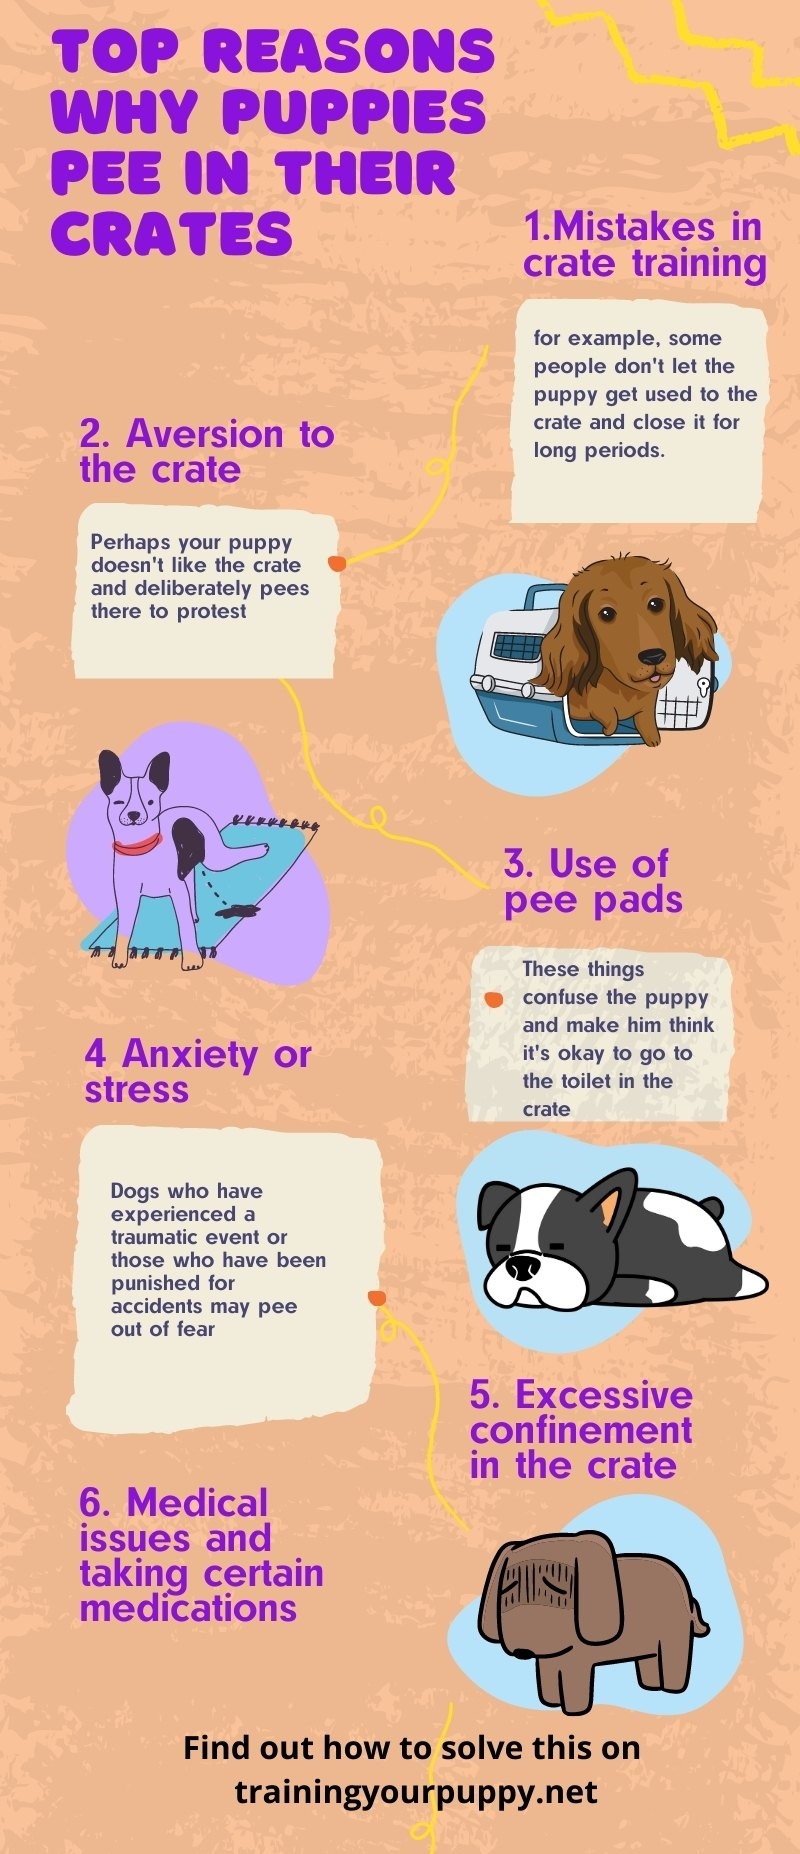 Top reasons why puppies pee in their crates